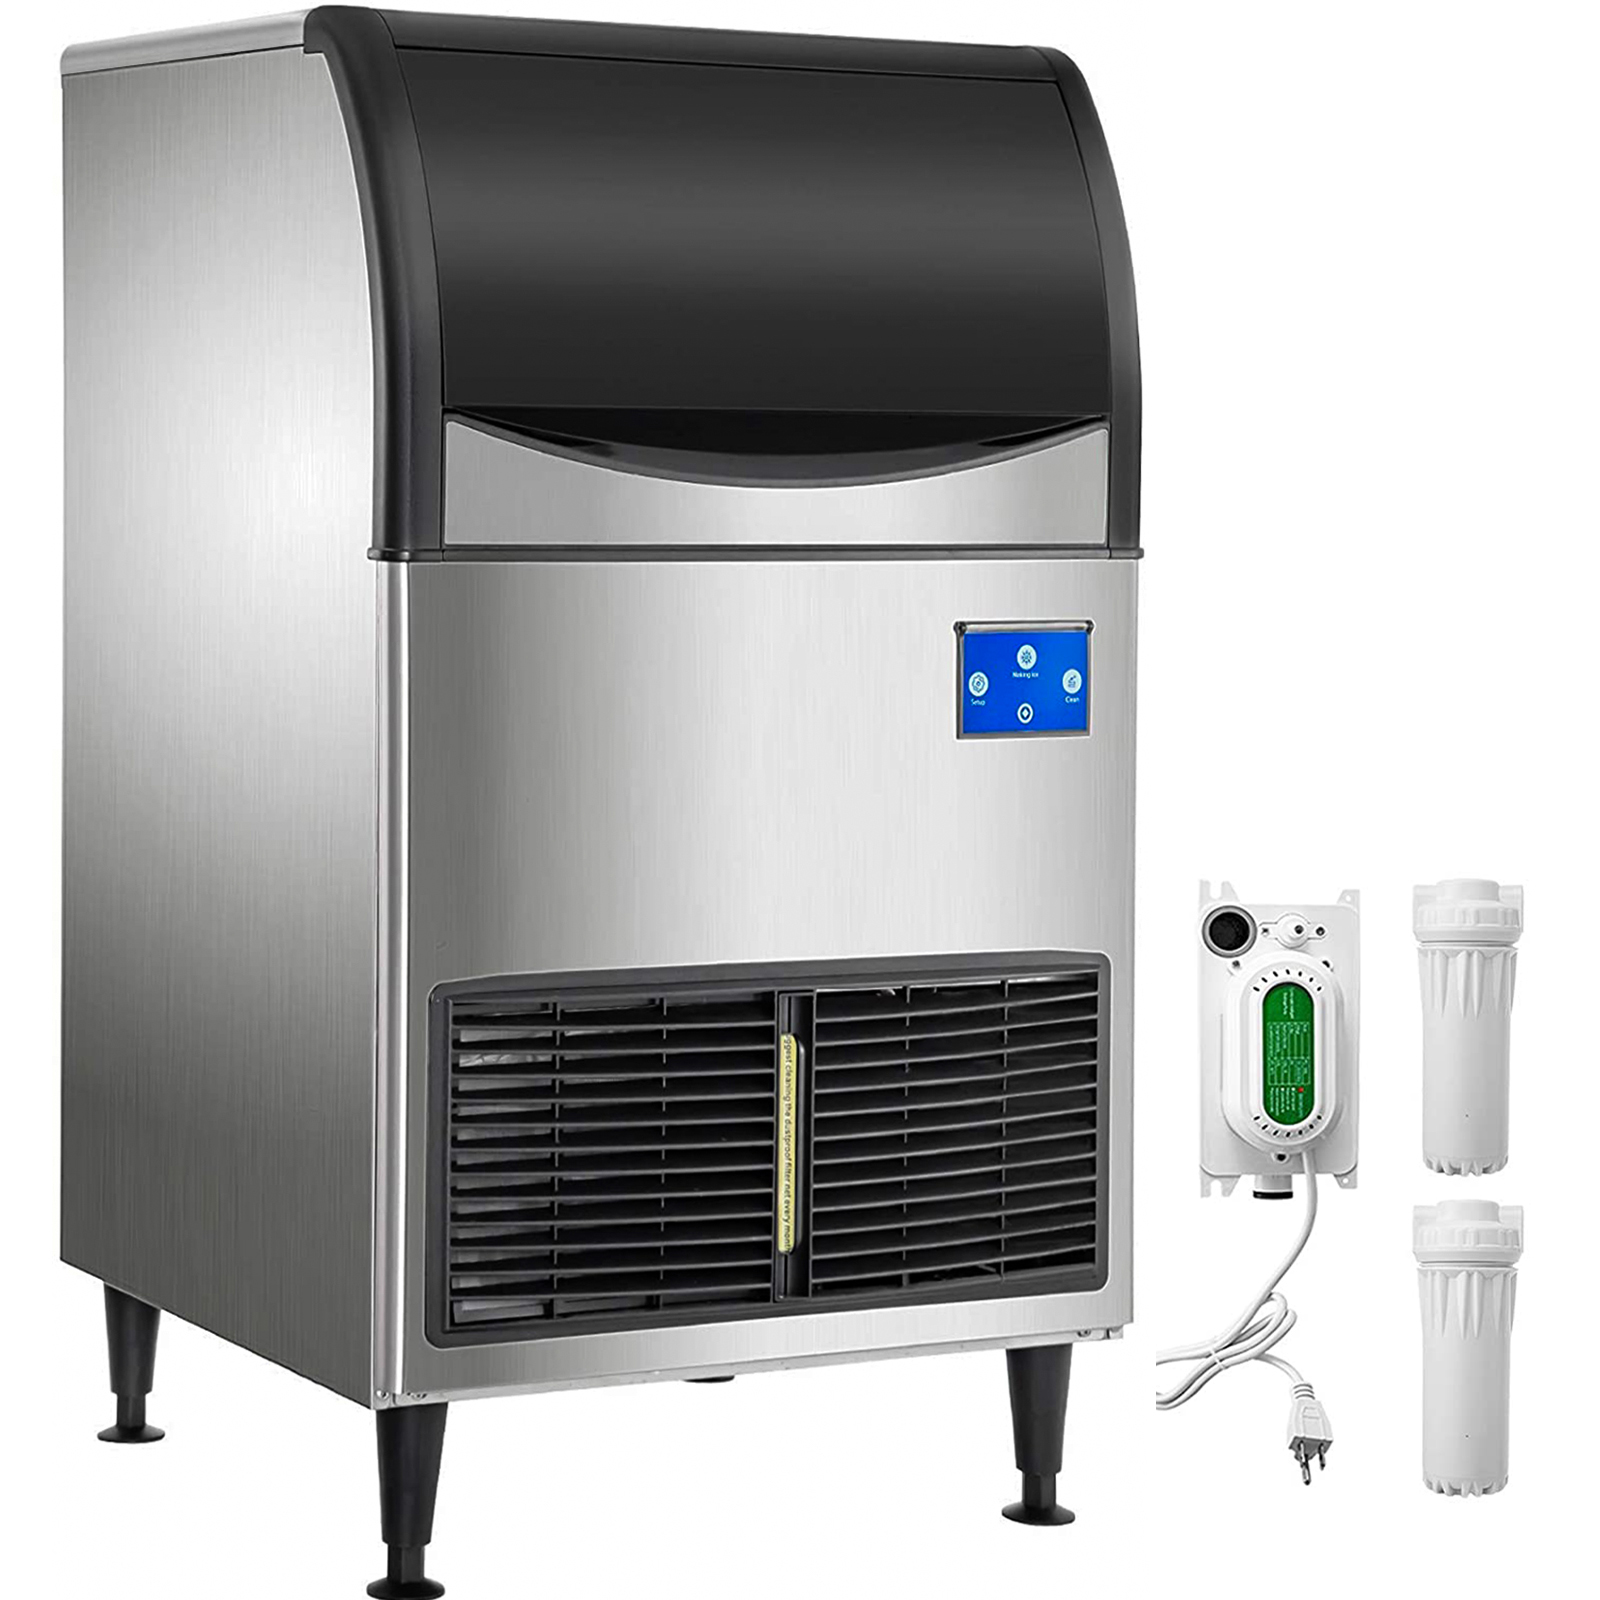 VEVOR 110V Commercial Ice Maker 265LBS/24H, Large Storage Bin 121LBS, Clear Cube, Upgraded LCD Panel w/WI-FI System, SECOP Compressor от Vevor Many GEOs